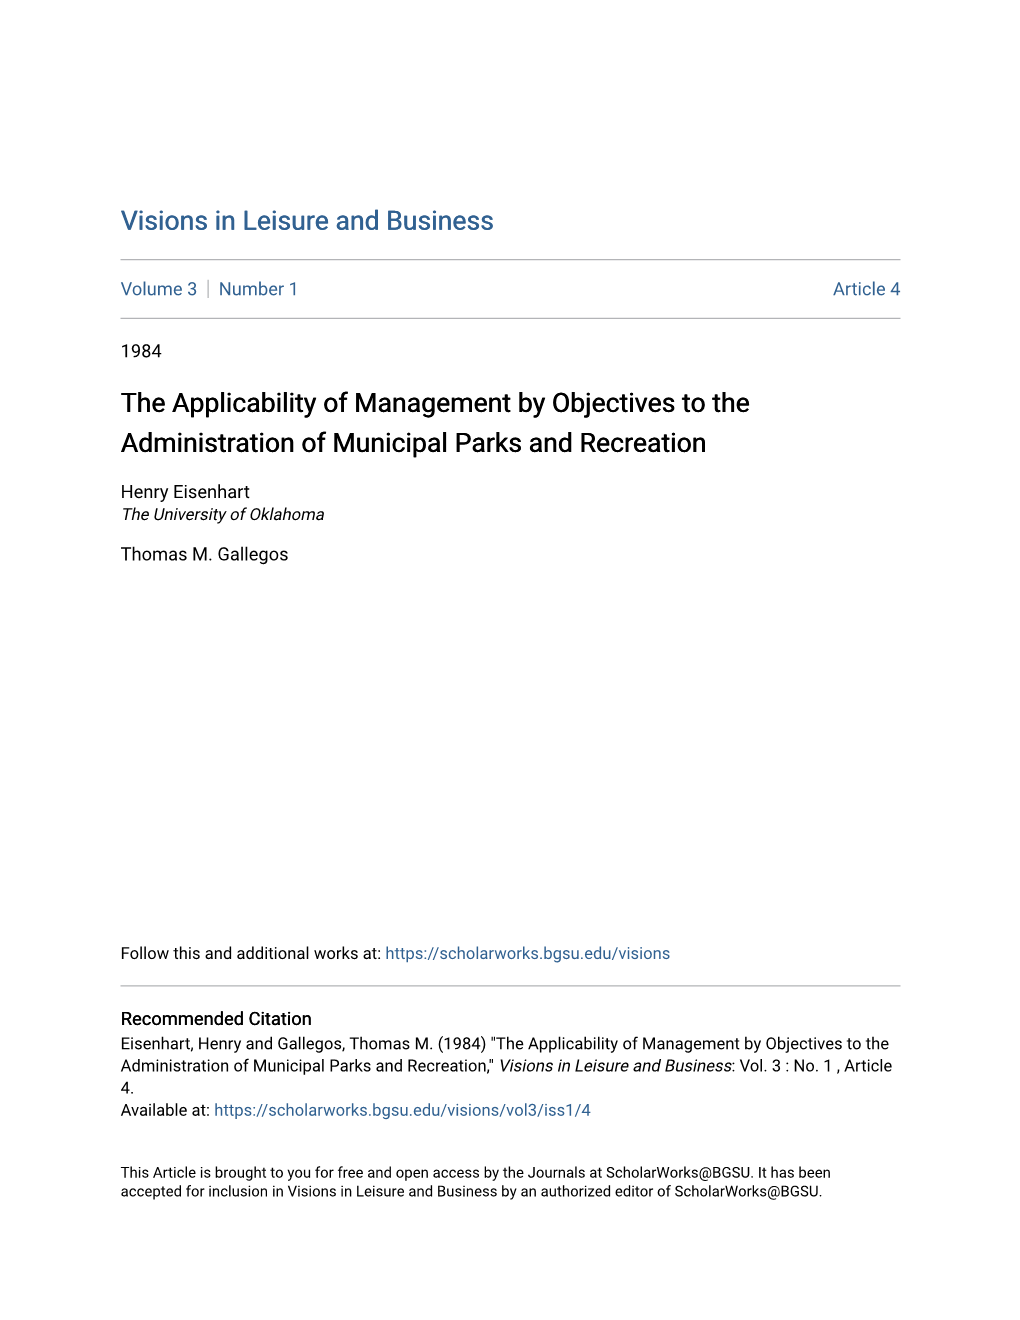 The Applicability of Management by Objectives to the Administration of Municipal Parks and Recreation